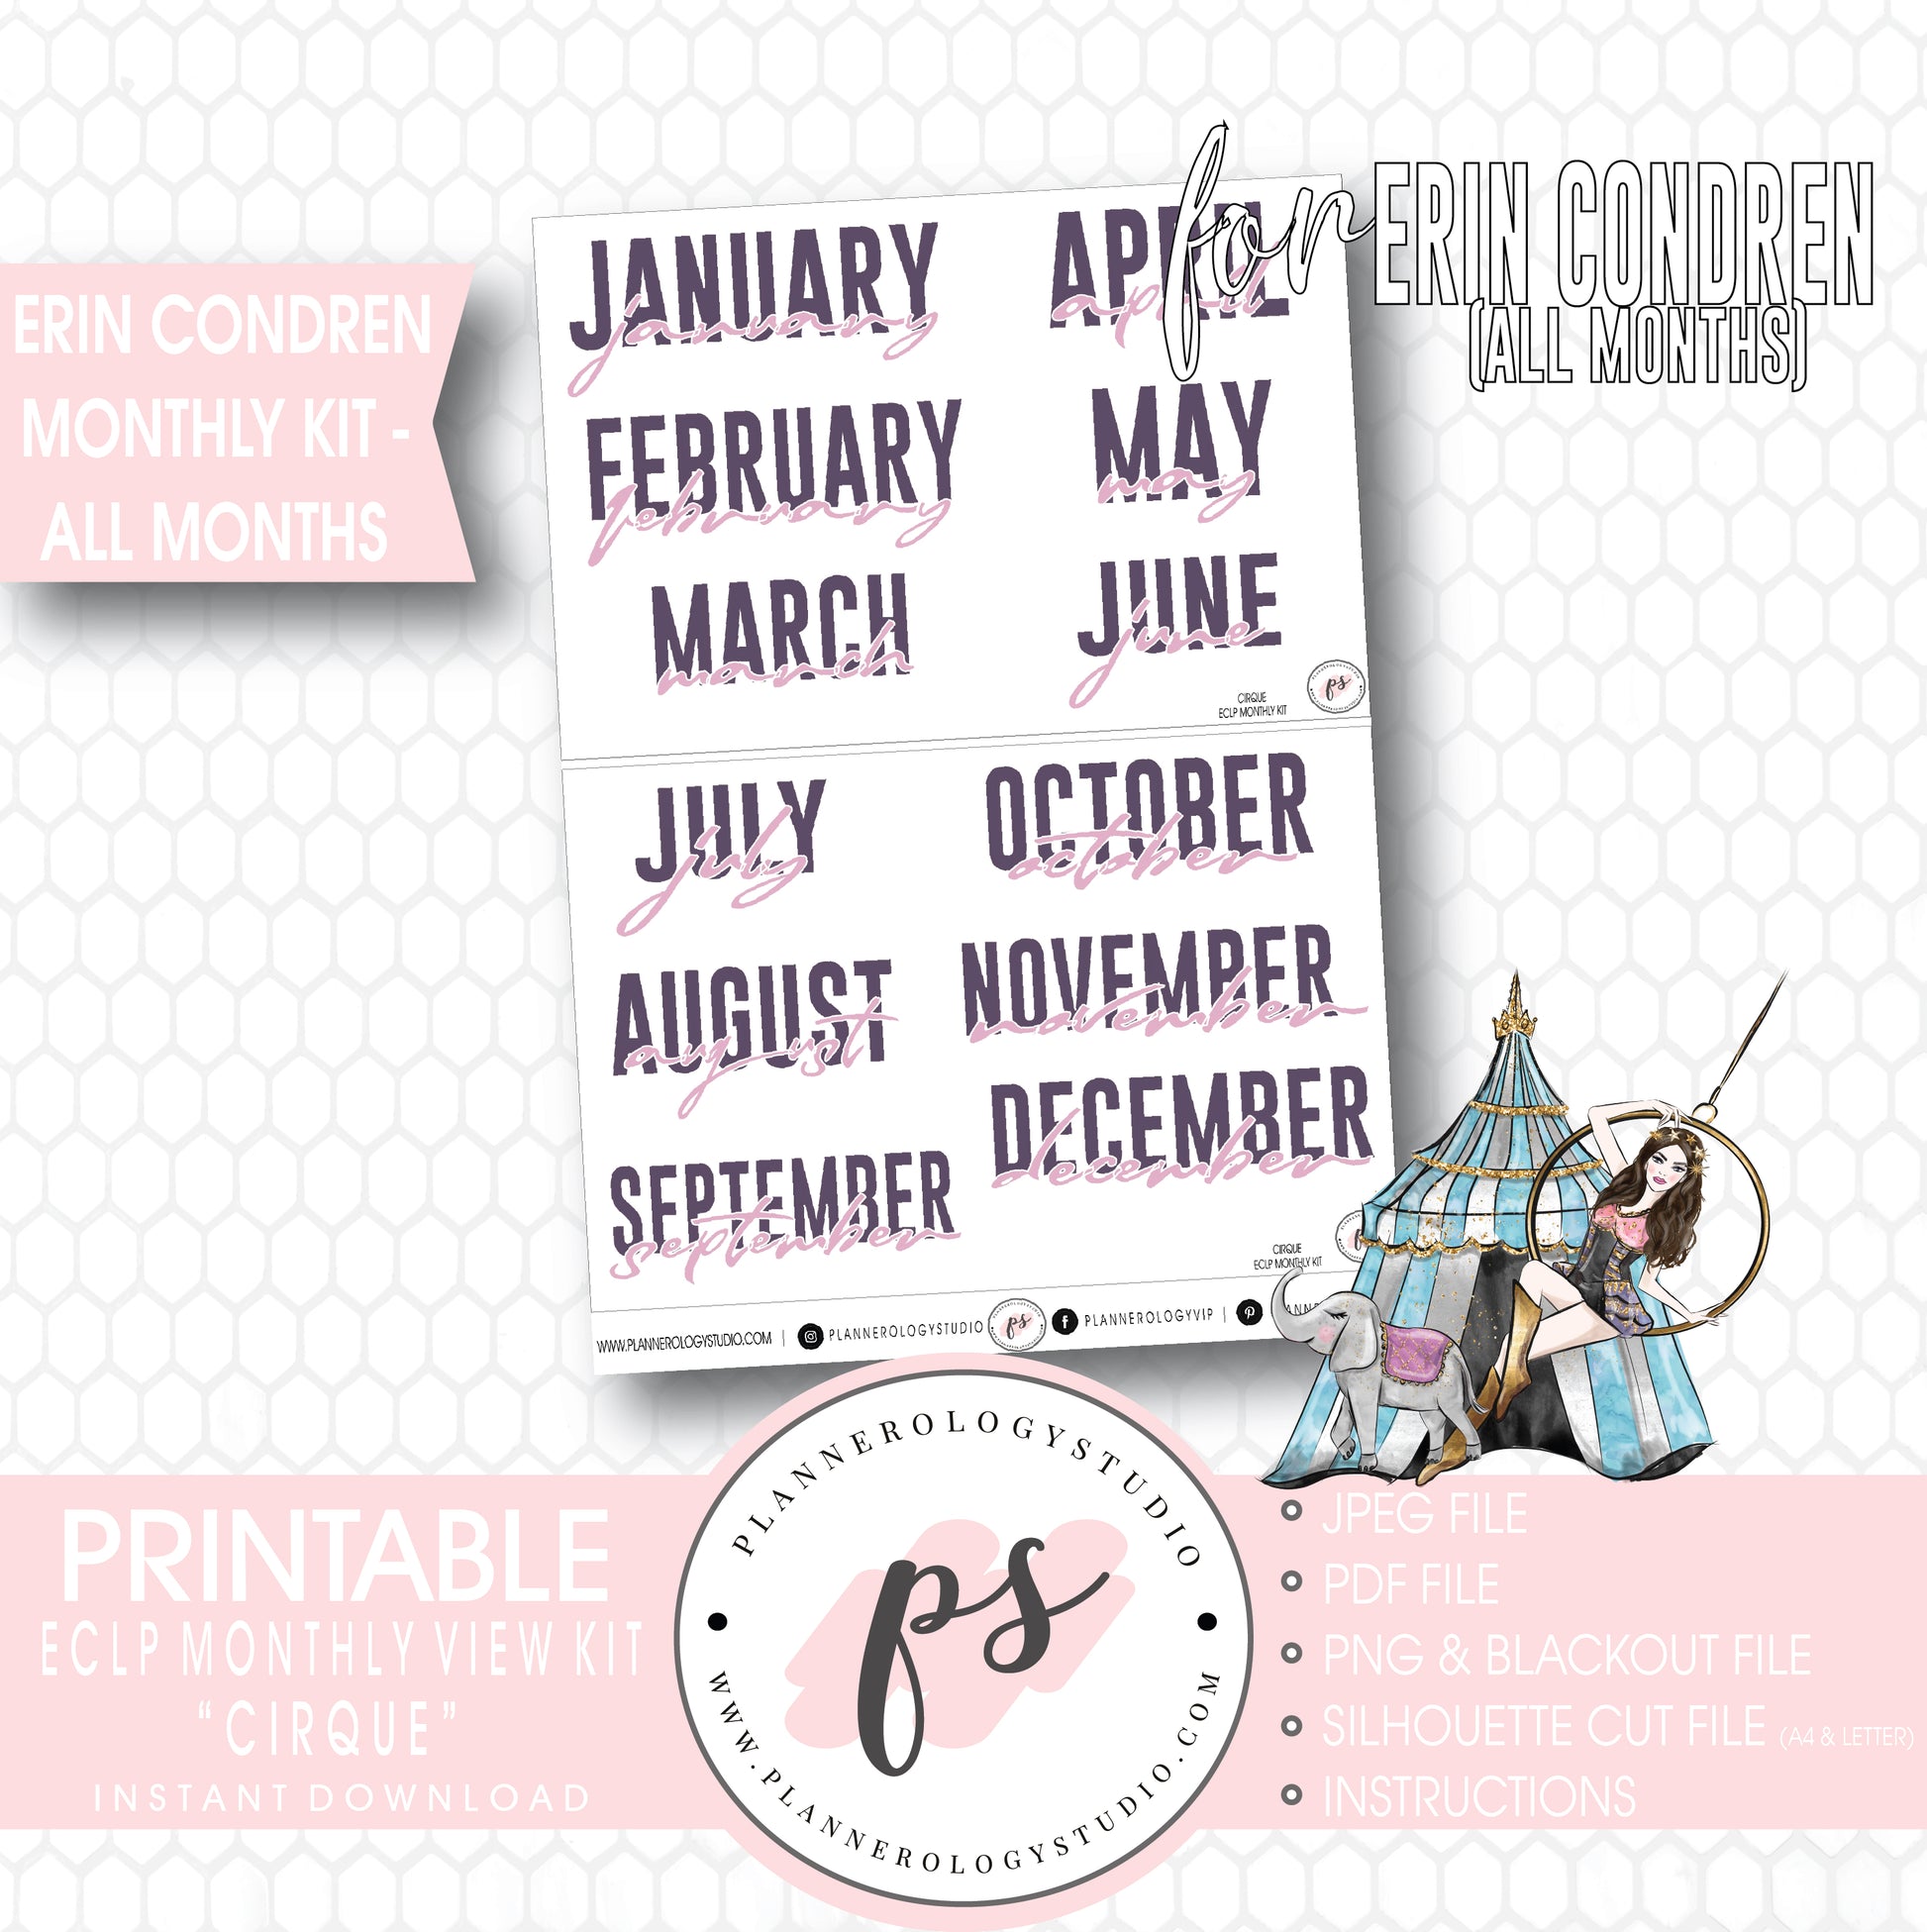 Cirque Undated Monthly View Kit (All Months) Digital Printable Planner Stickers (for use with Erin Condren) - Plannerologystudio